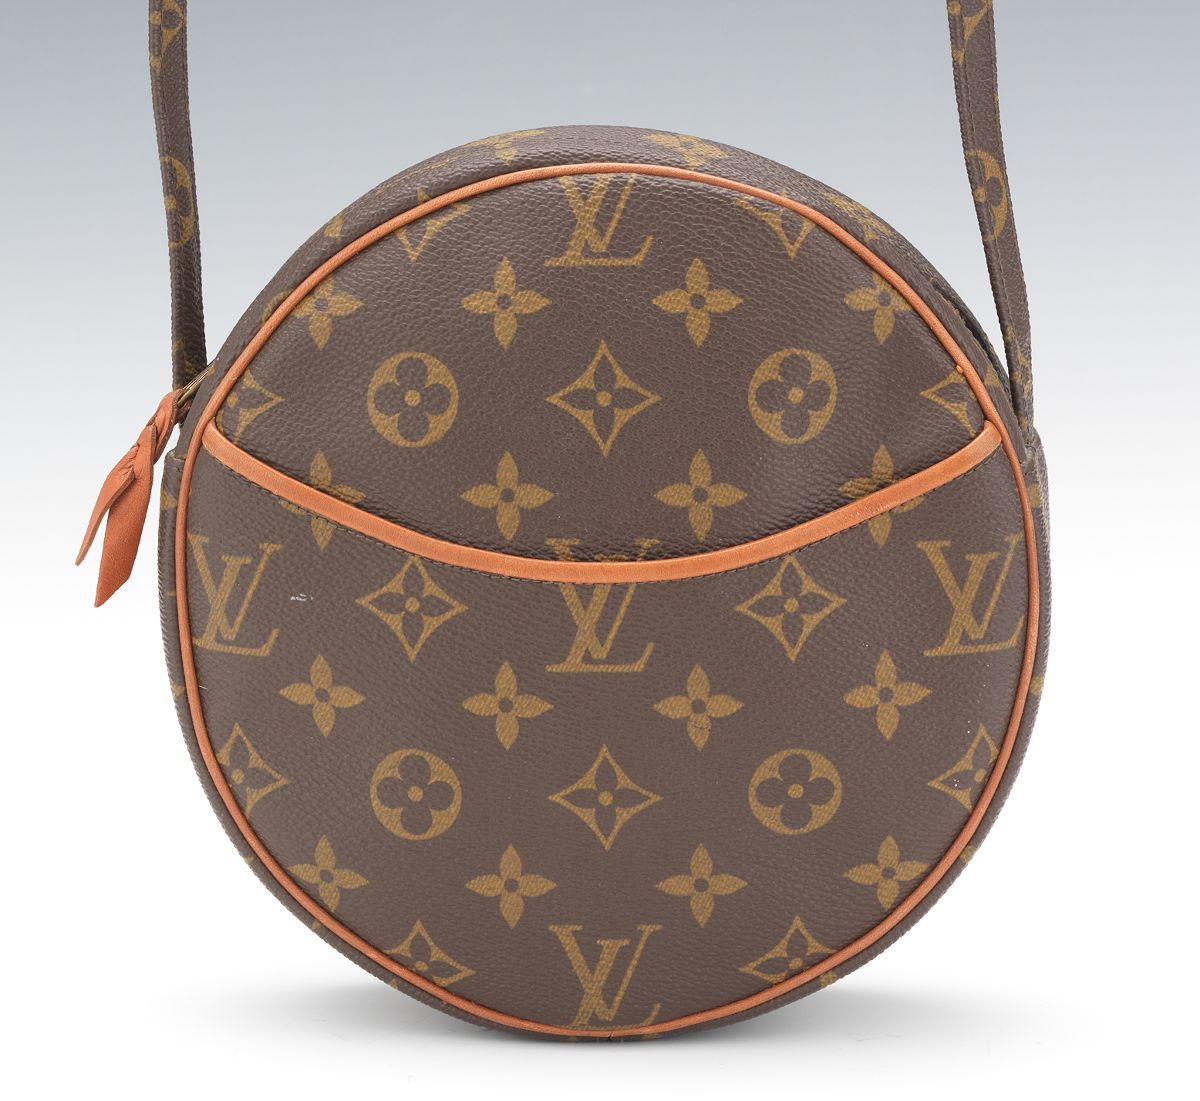 Louis Vuitton Vintage Monogram Canvas Round Crossbody Bag By French Company 09 05 14 Sold 327 75